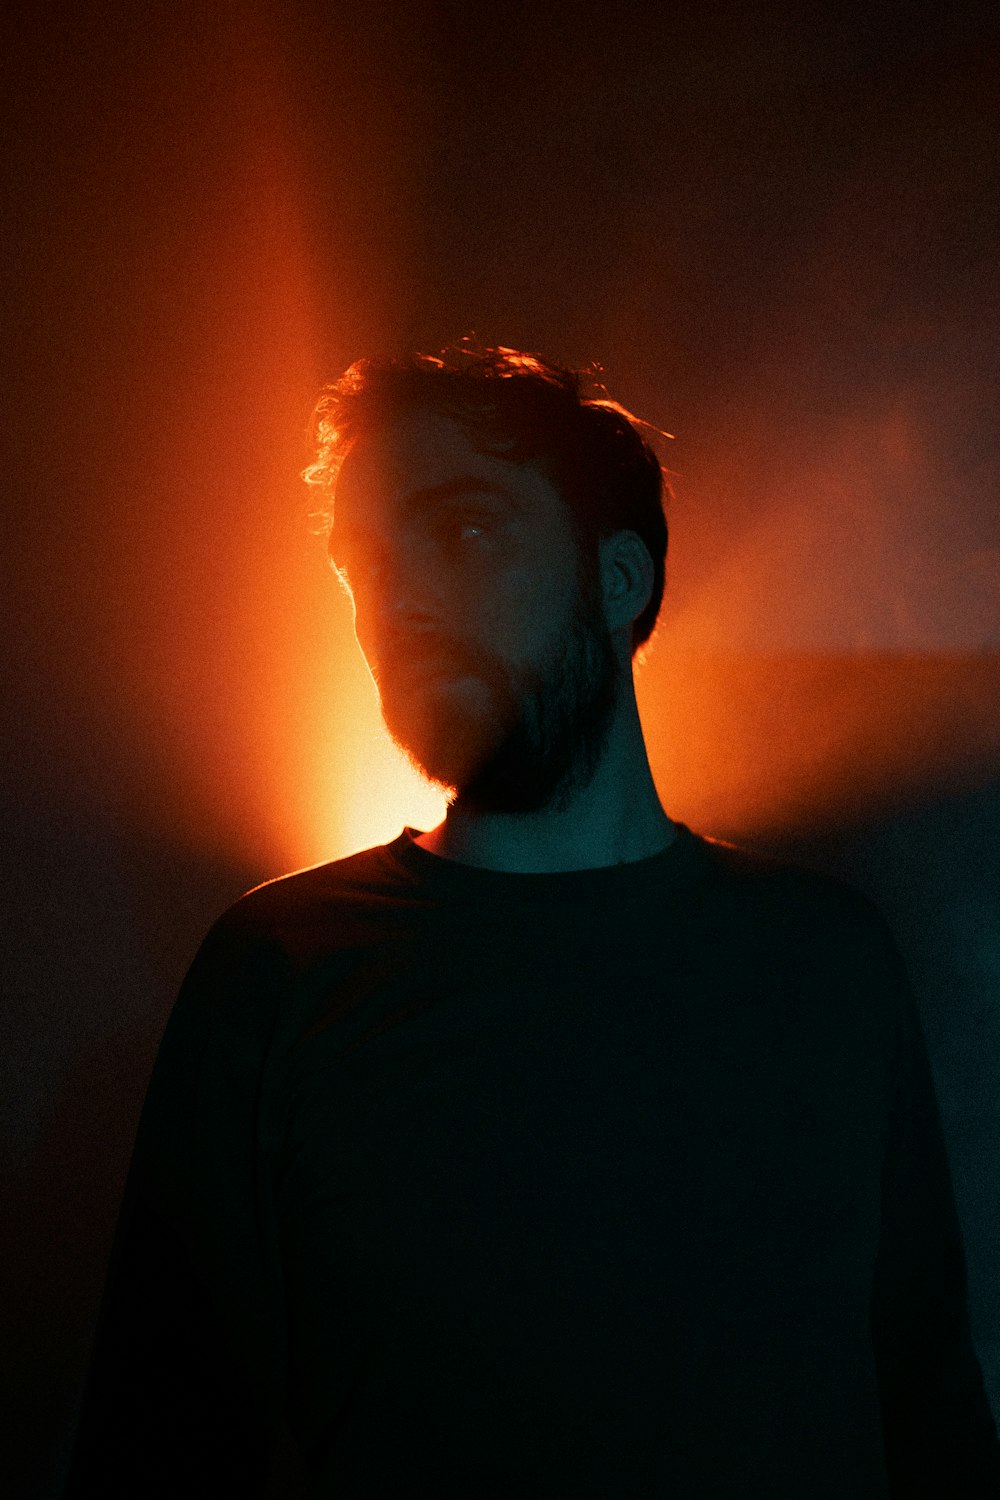 a man with a beard standing in a dark room